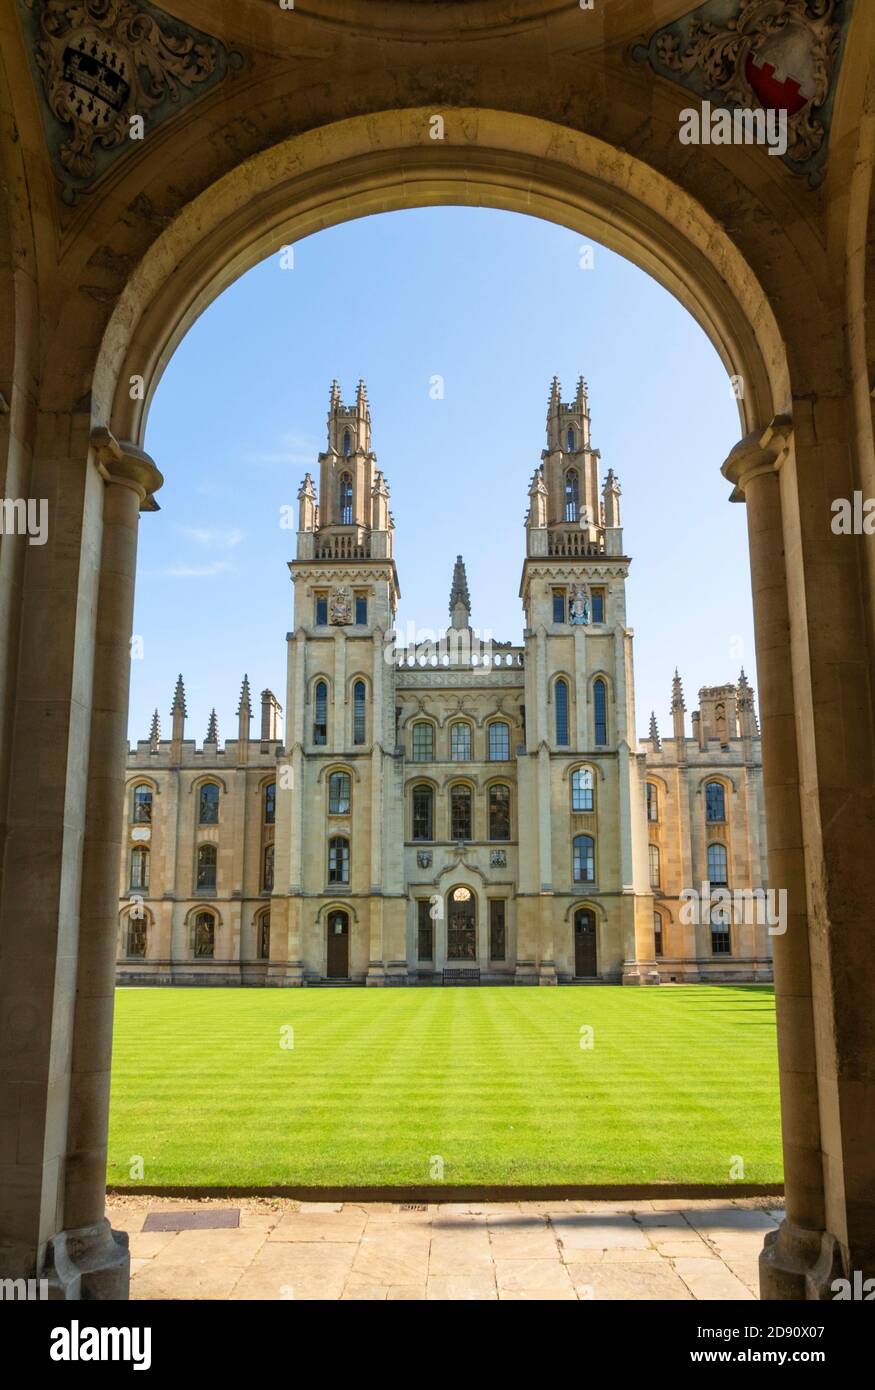 Oxford University college The inner walls Gothic towers and north quadrangle of All Souls College Oxford Oxfordshire England UK GB Europe Stock Photo